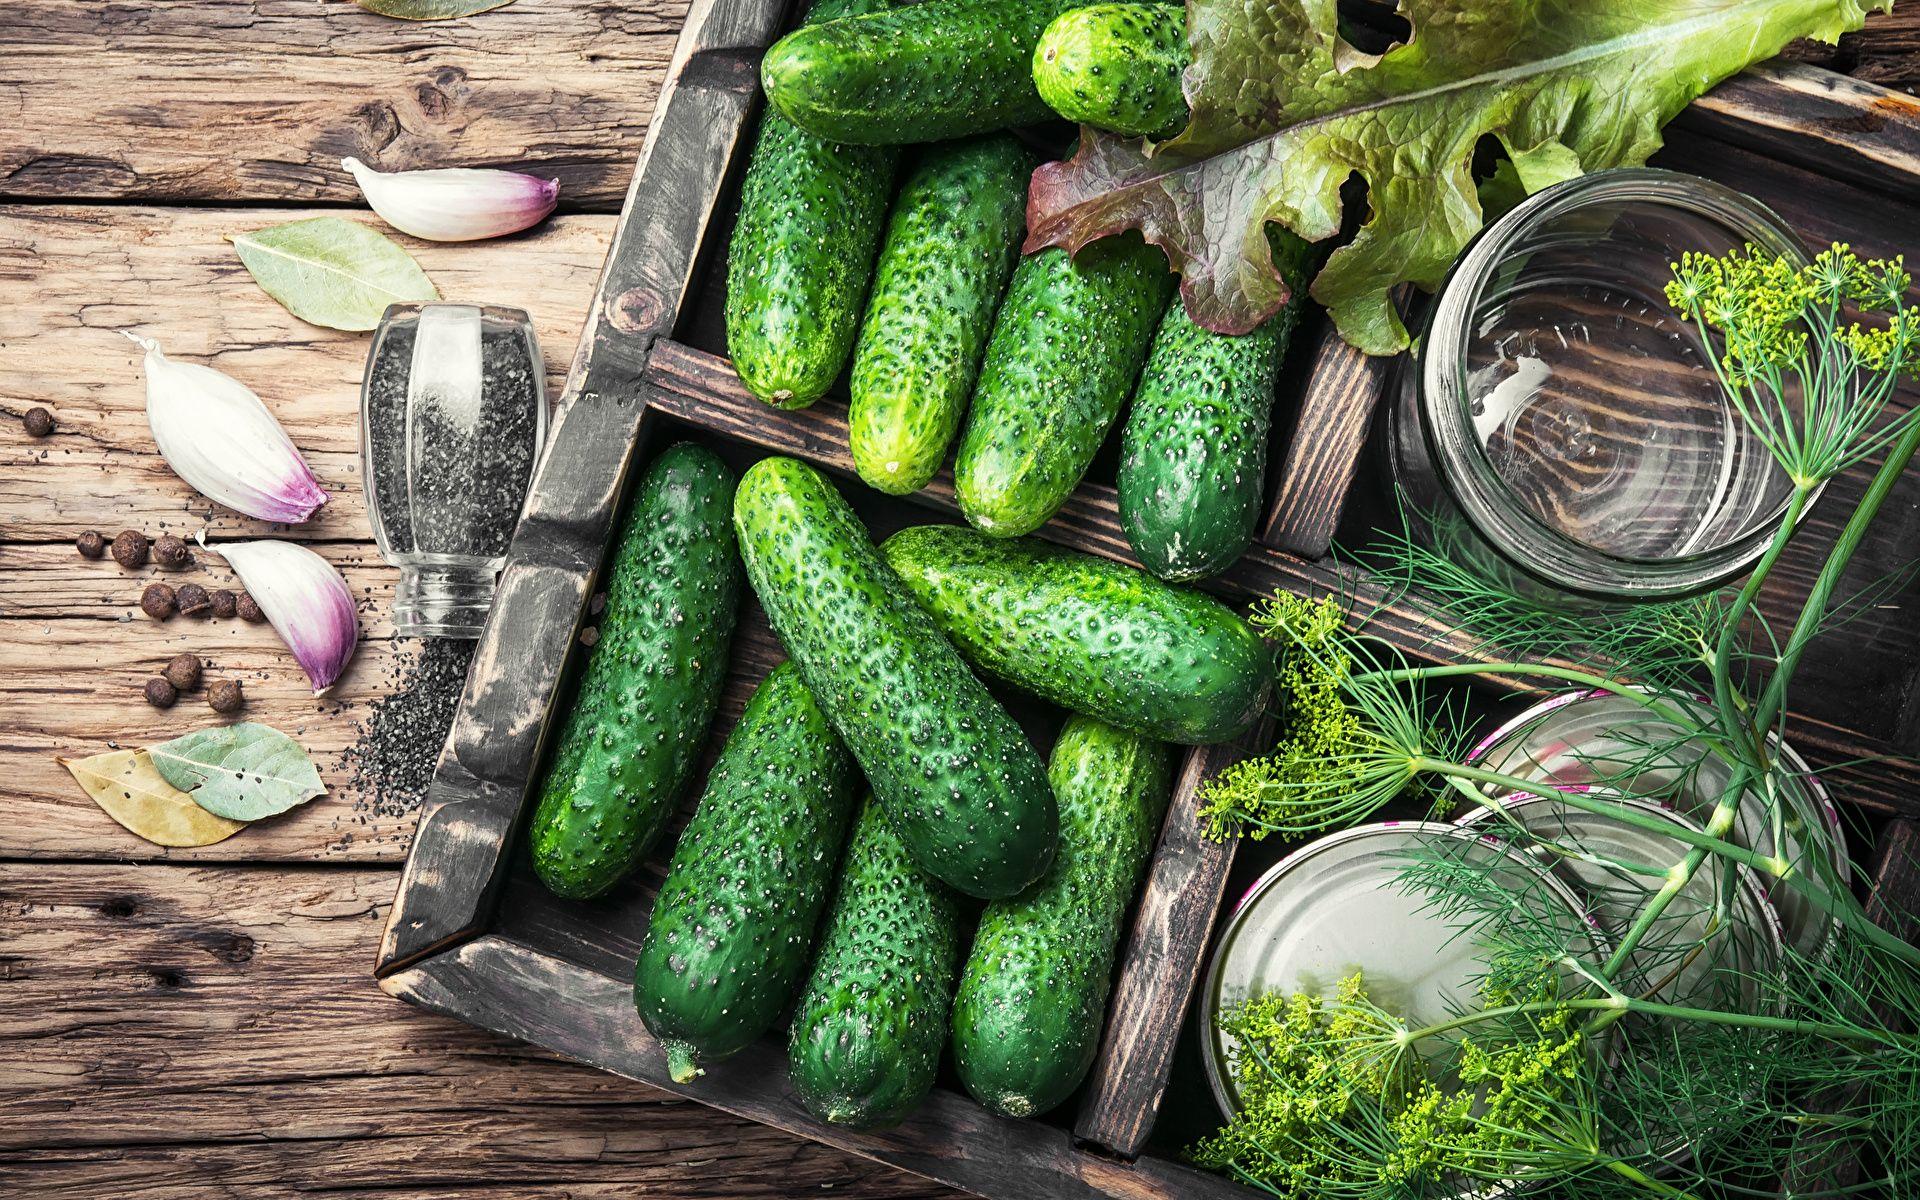 Picture Cucumbers Dill Garlic Food Vegetables Wood planks 1920x1200